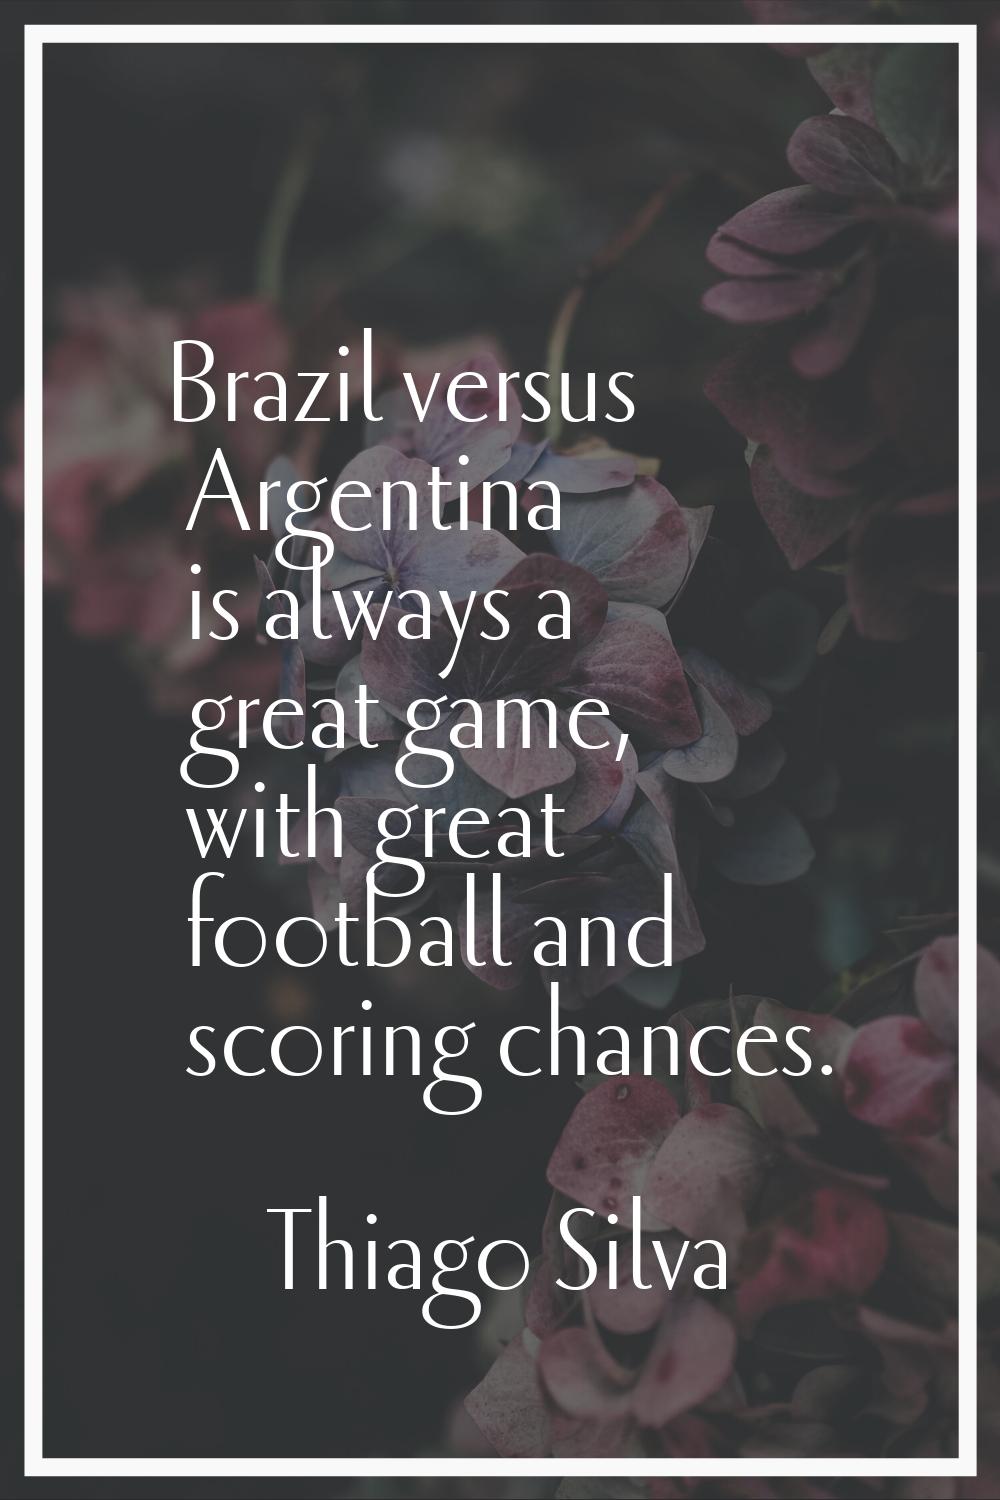 Brazil versus Argentina is always a great game, with great football and scoring chances.